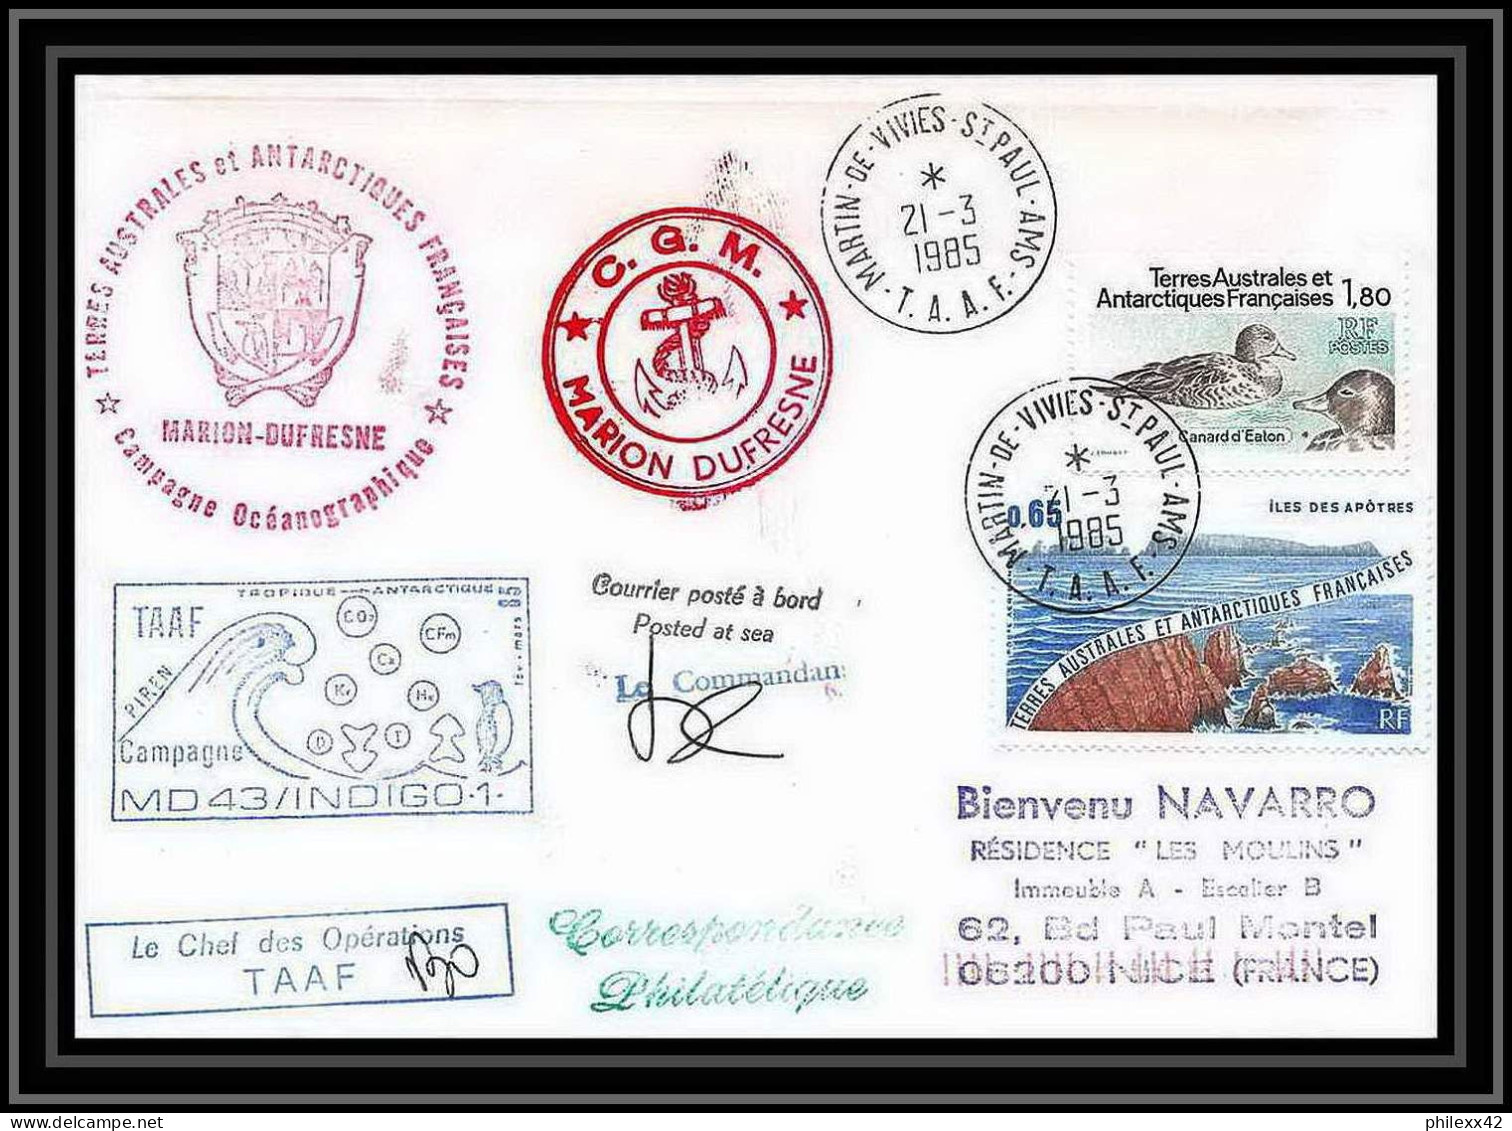 1519 Campagne Md 43 Indigo 1 21/3/1985 Signé Signed Marion Dufresne TAAF Antarctic Terres Australes Lettre (cover) - Antarktis-Expeditionen